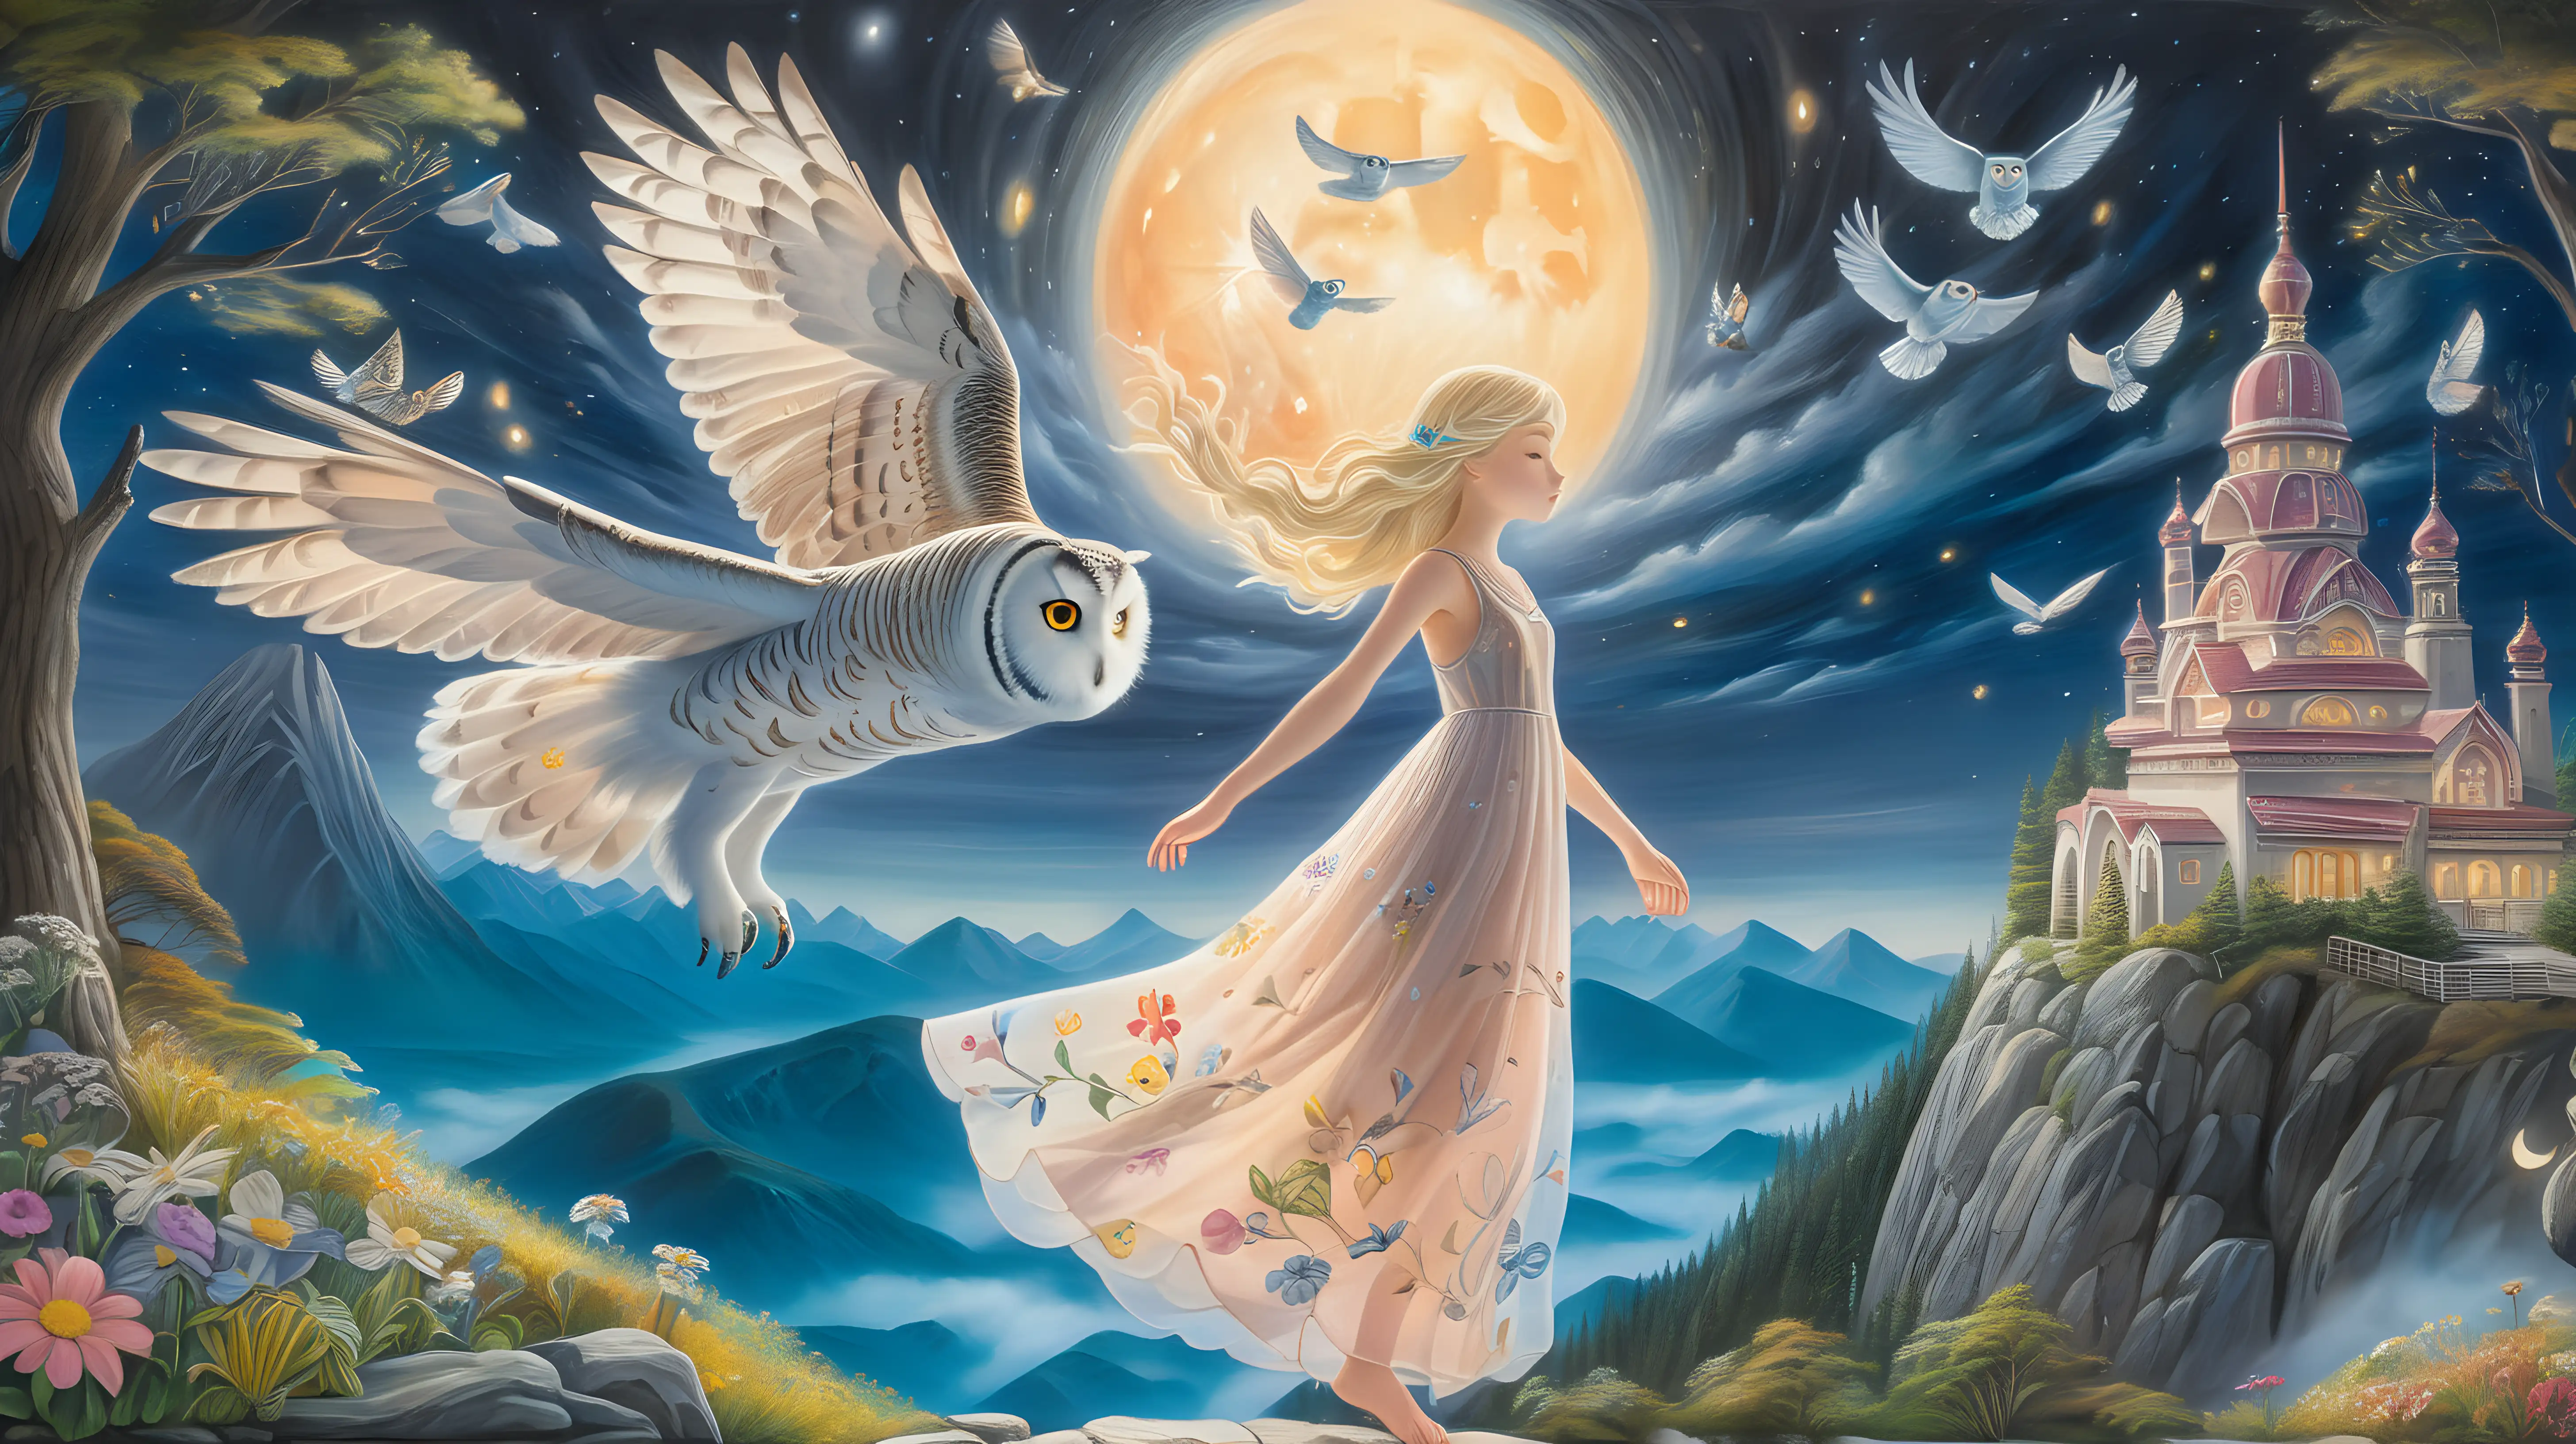 DIORAMA, ghibli inspired painting of beautiful enchanting slender, platinum blond, wavy, sheer flowy dress, 18 YEAR OLD girl who shape-shifts into an owl, owl princess, playing with a big colorful owl in an enchanted forest skyline, flowers, fireflies and moonlight, sea of clouds, mountain, temple, colorful, cliff